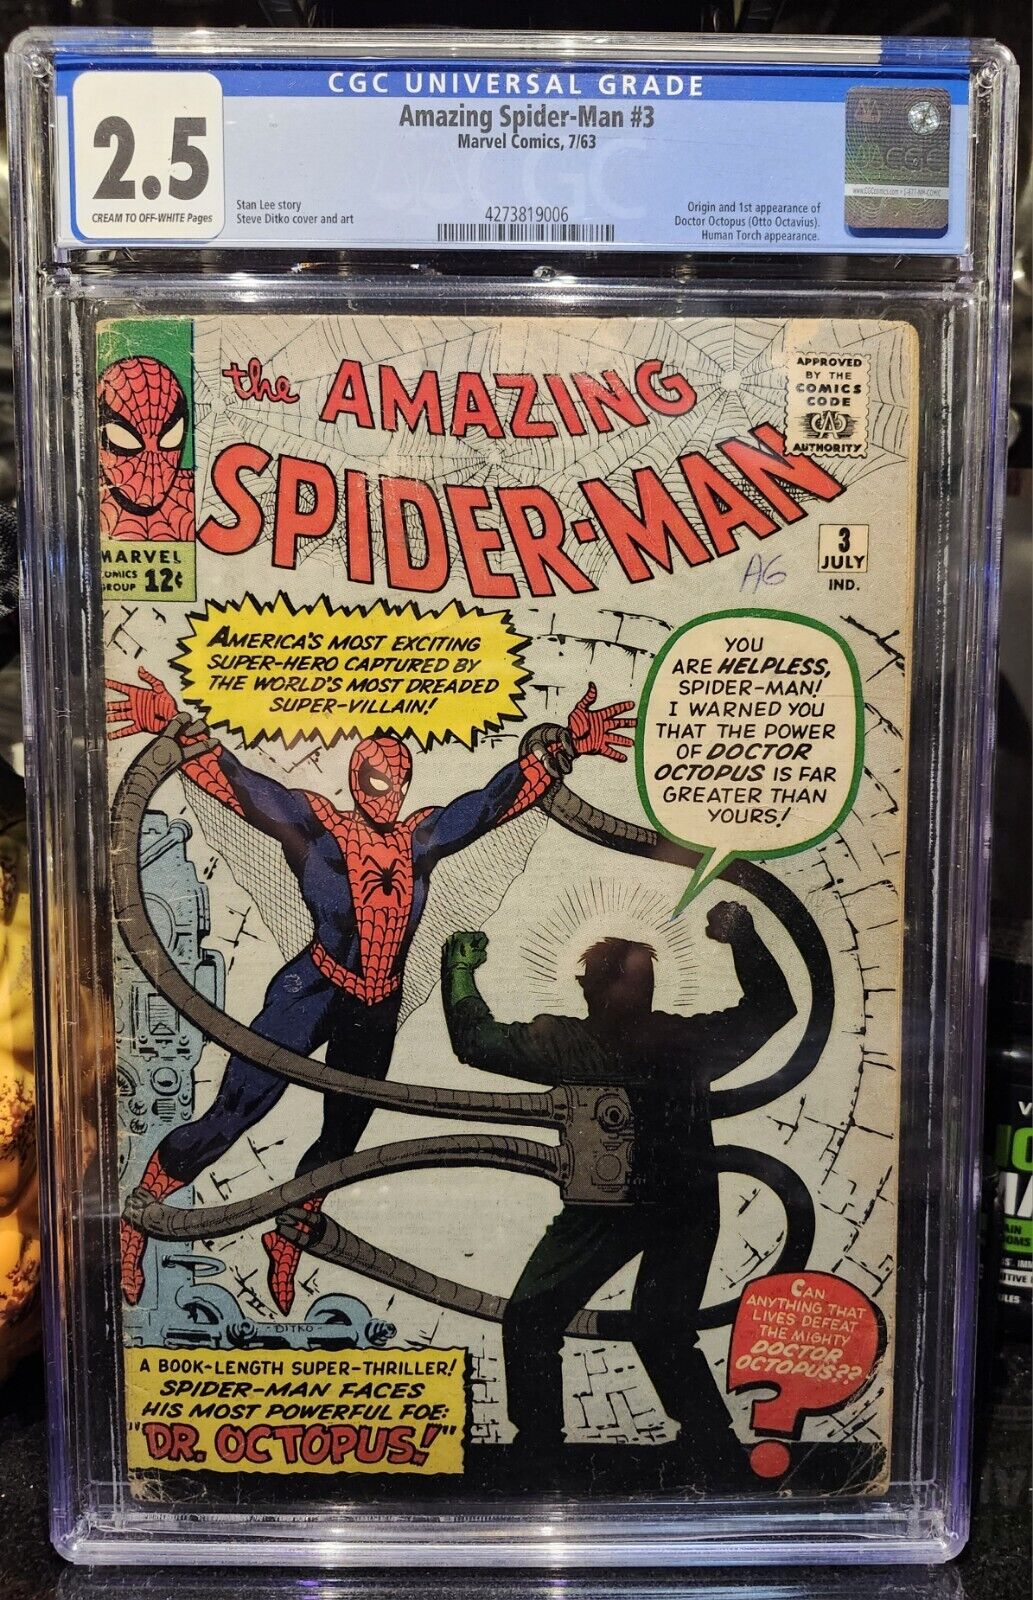 Amazing Spider-Man #3 CGC 2.5 Marvel 1963 First appearance of Dr. Octopus